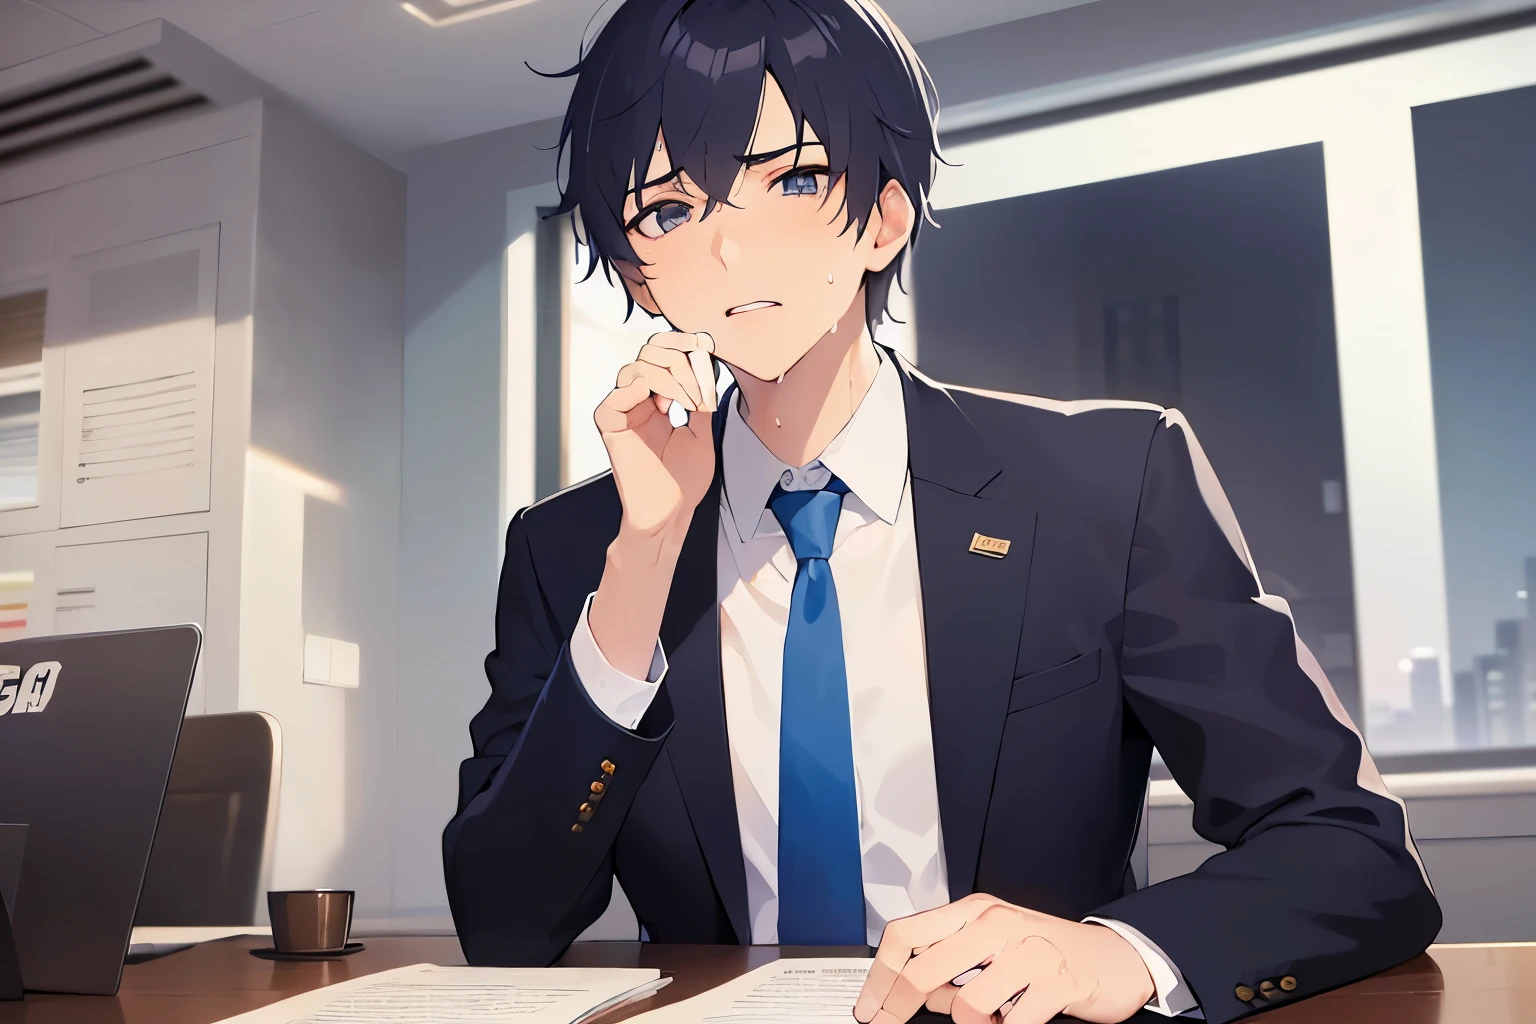 raising hands, Biologically correct five fingers、Upper body, masterpiece、highest quality、Alone、(25-year-old male:1.5) and (Black short hair) and (blue eyes), (business suit:1.5) and (Blue tie)、Sitting、(confused, Sweat:1.5), The background is the office、document、desk